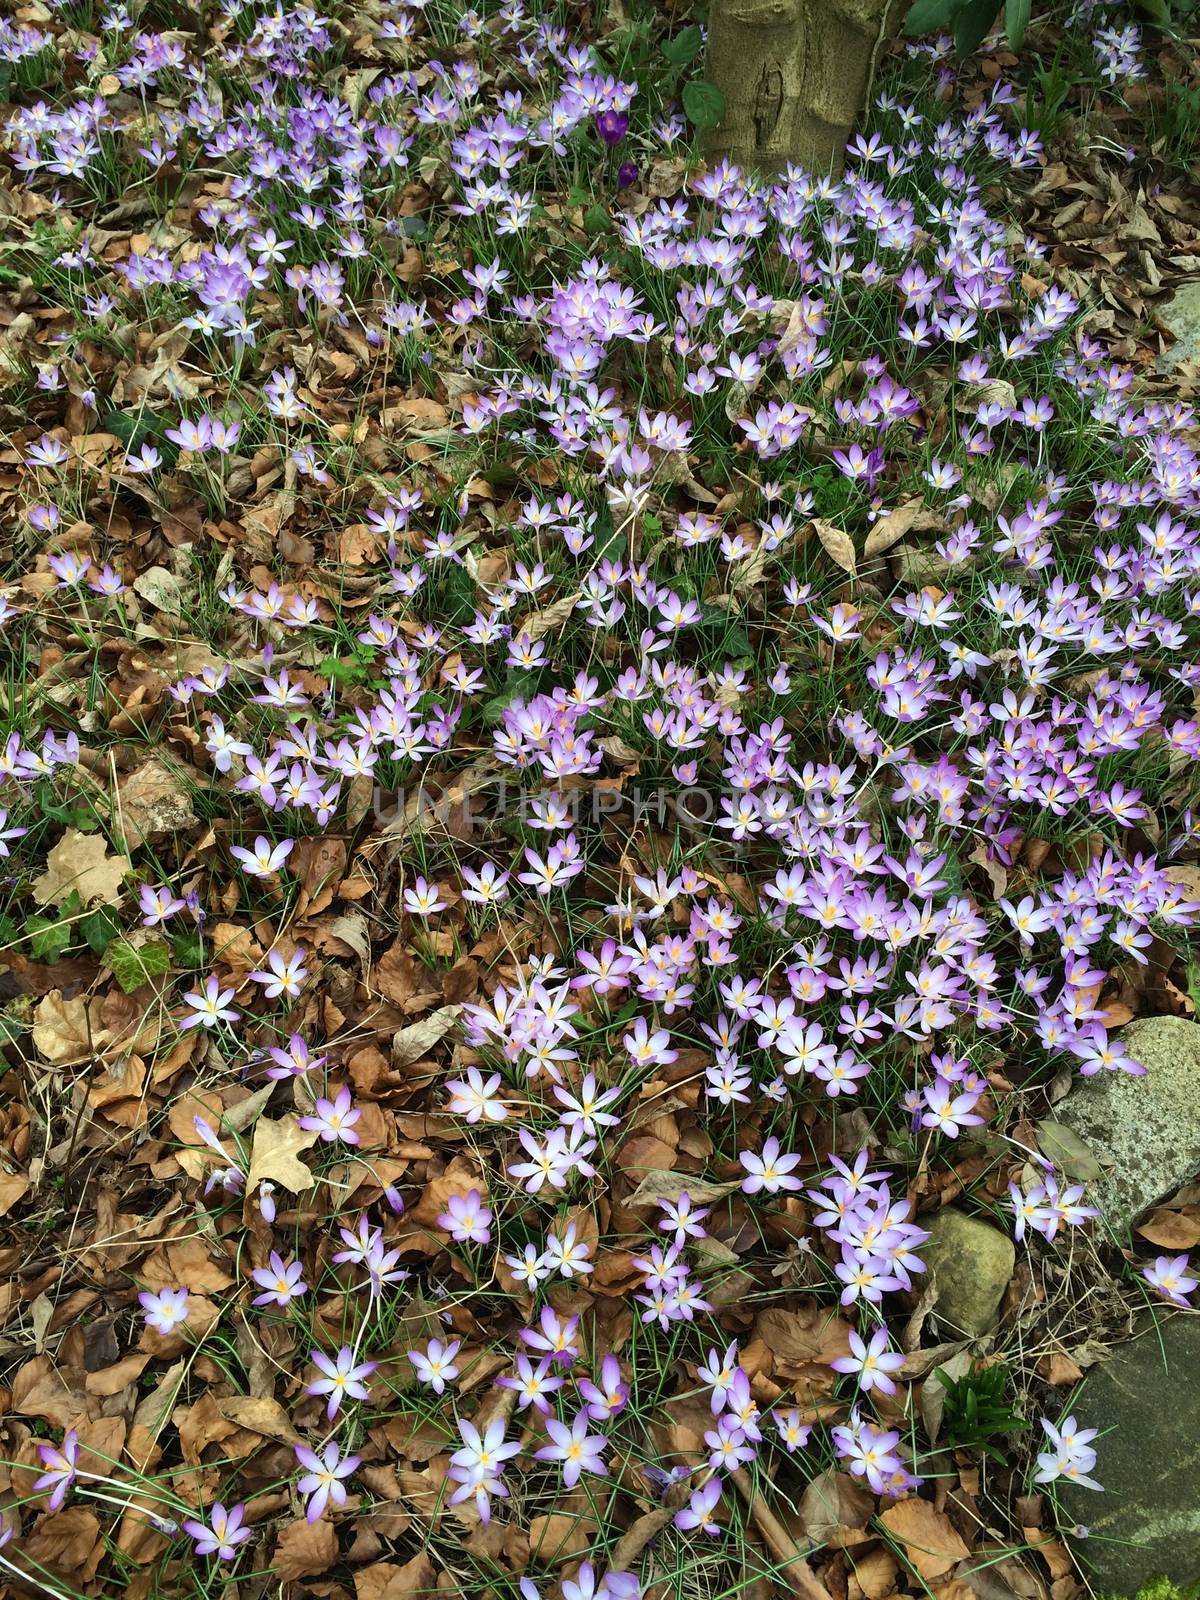 Tiny violet crocus flowers blooming in nature